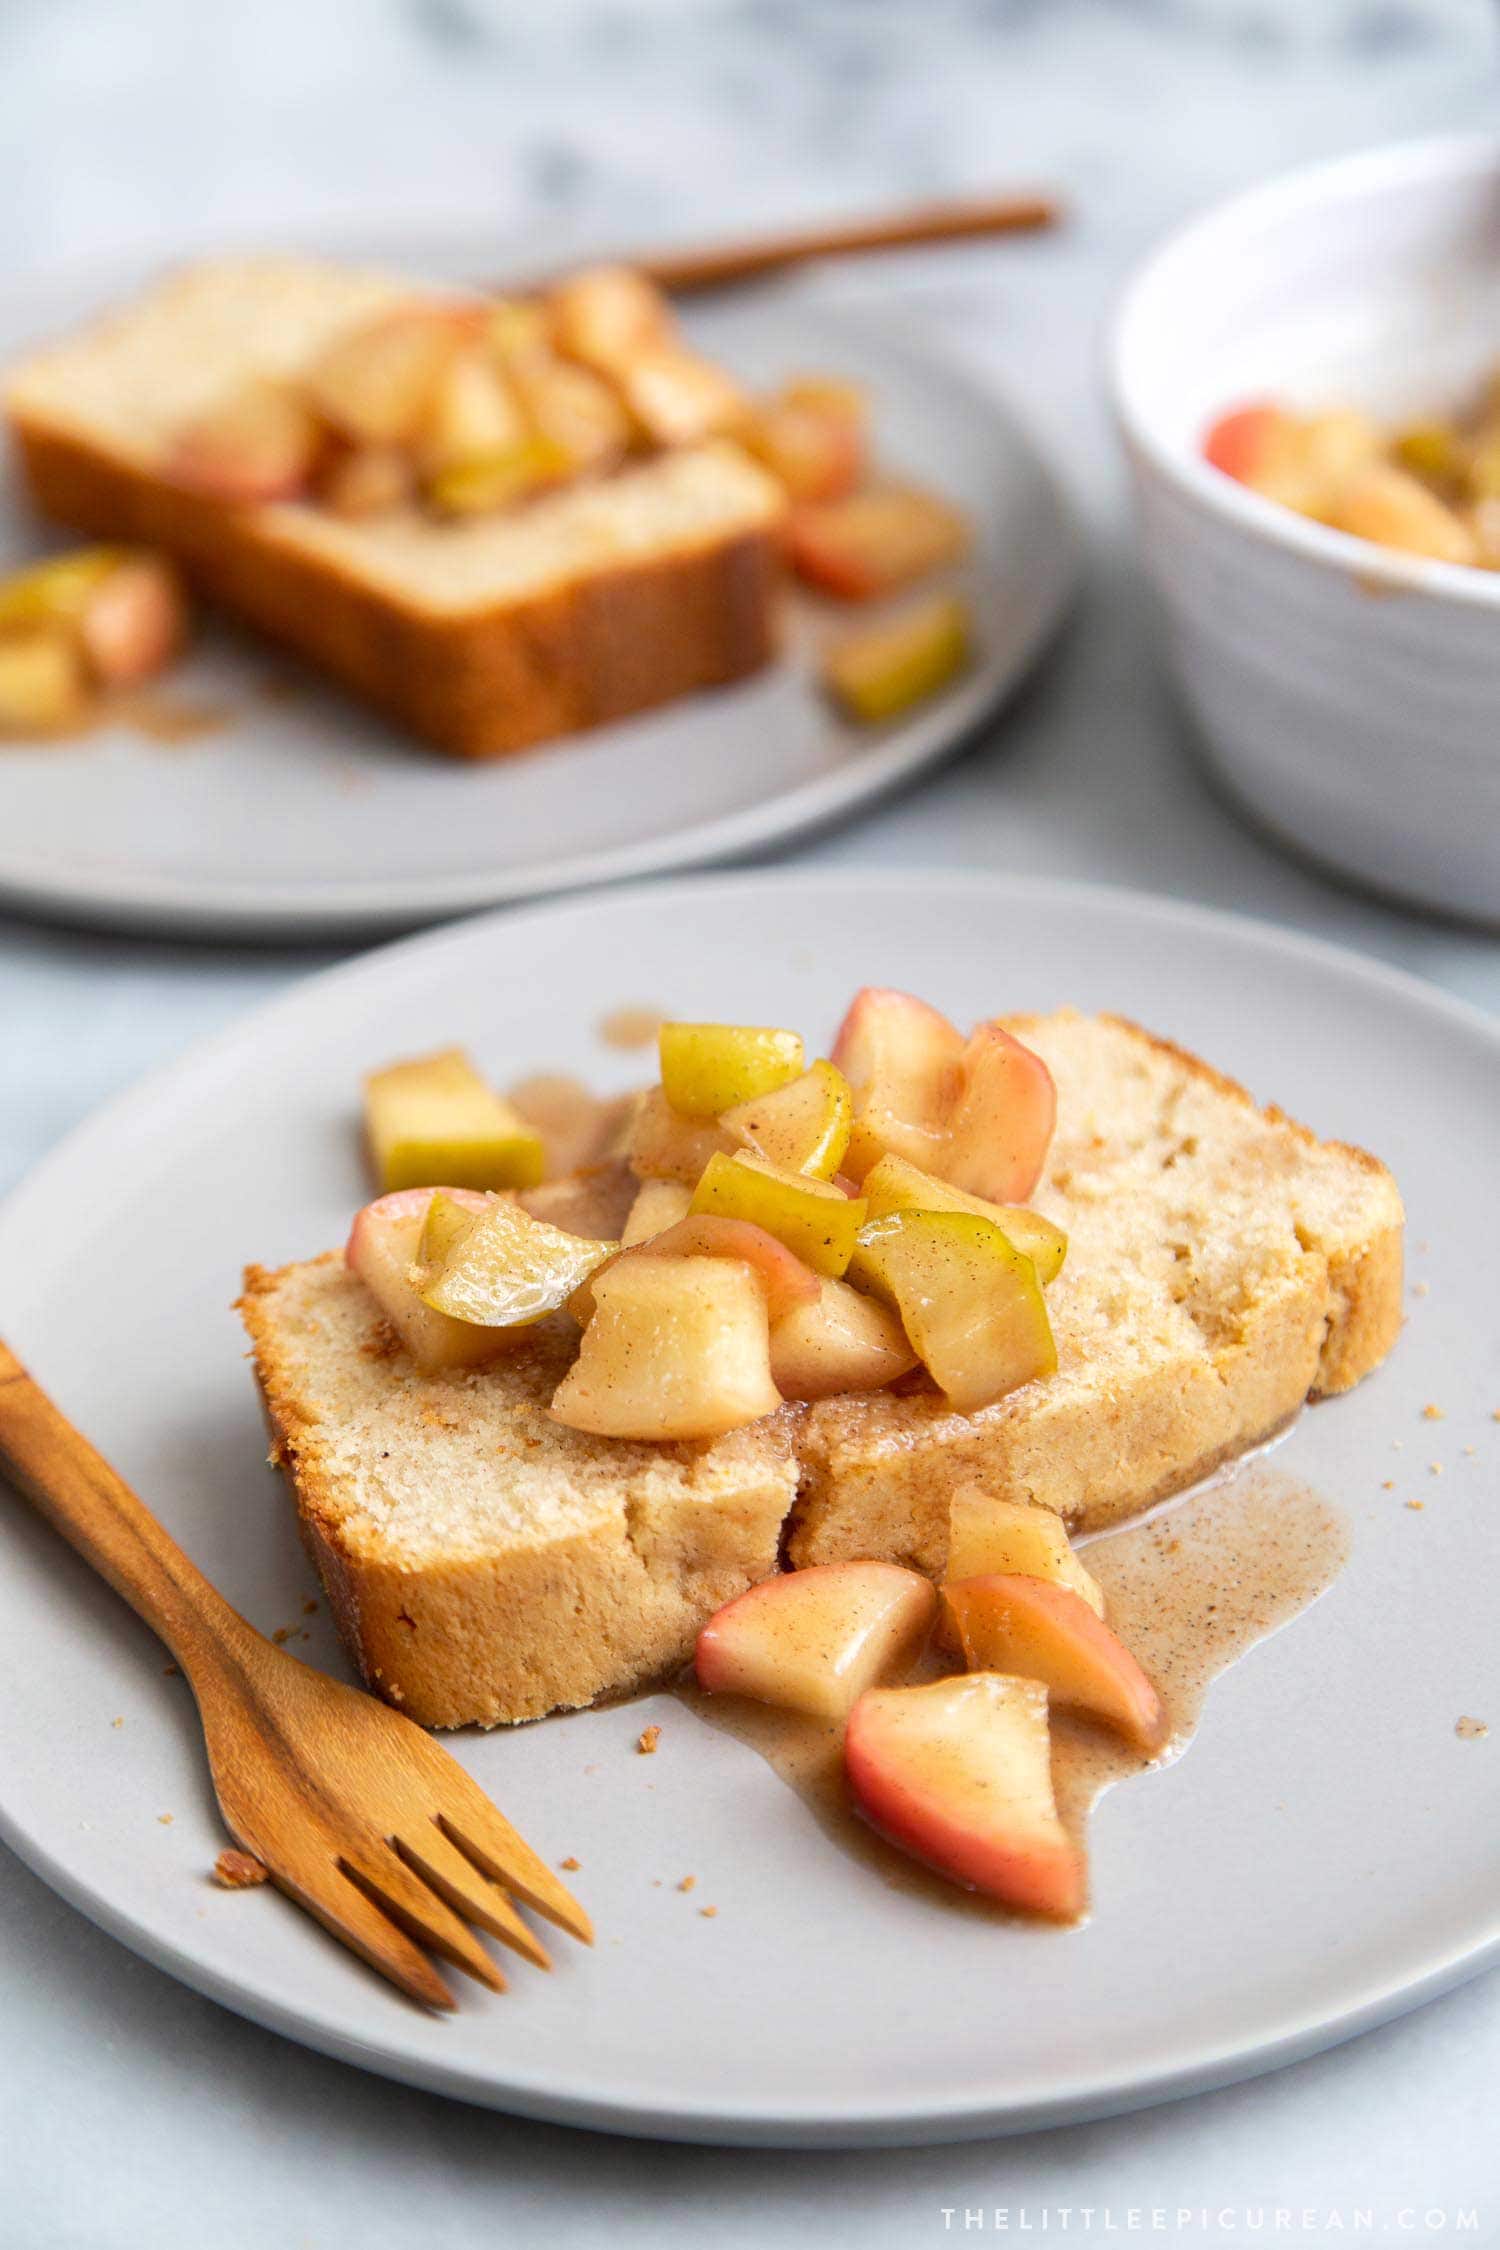 Spiced loaf cake topped with stewed apples